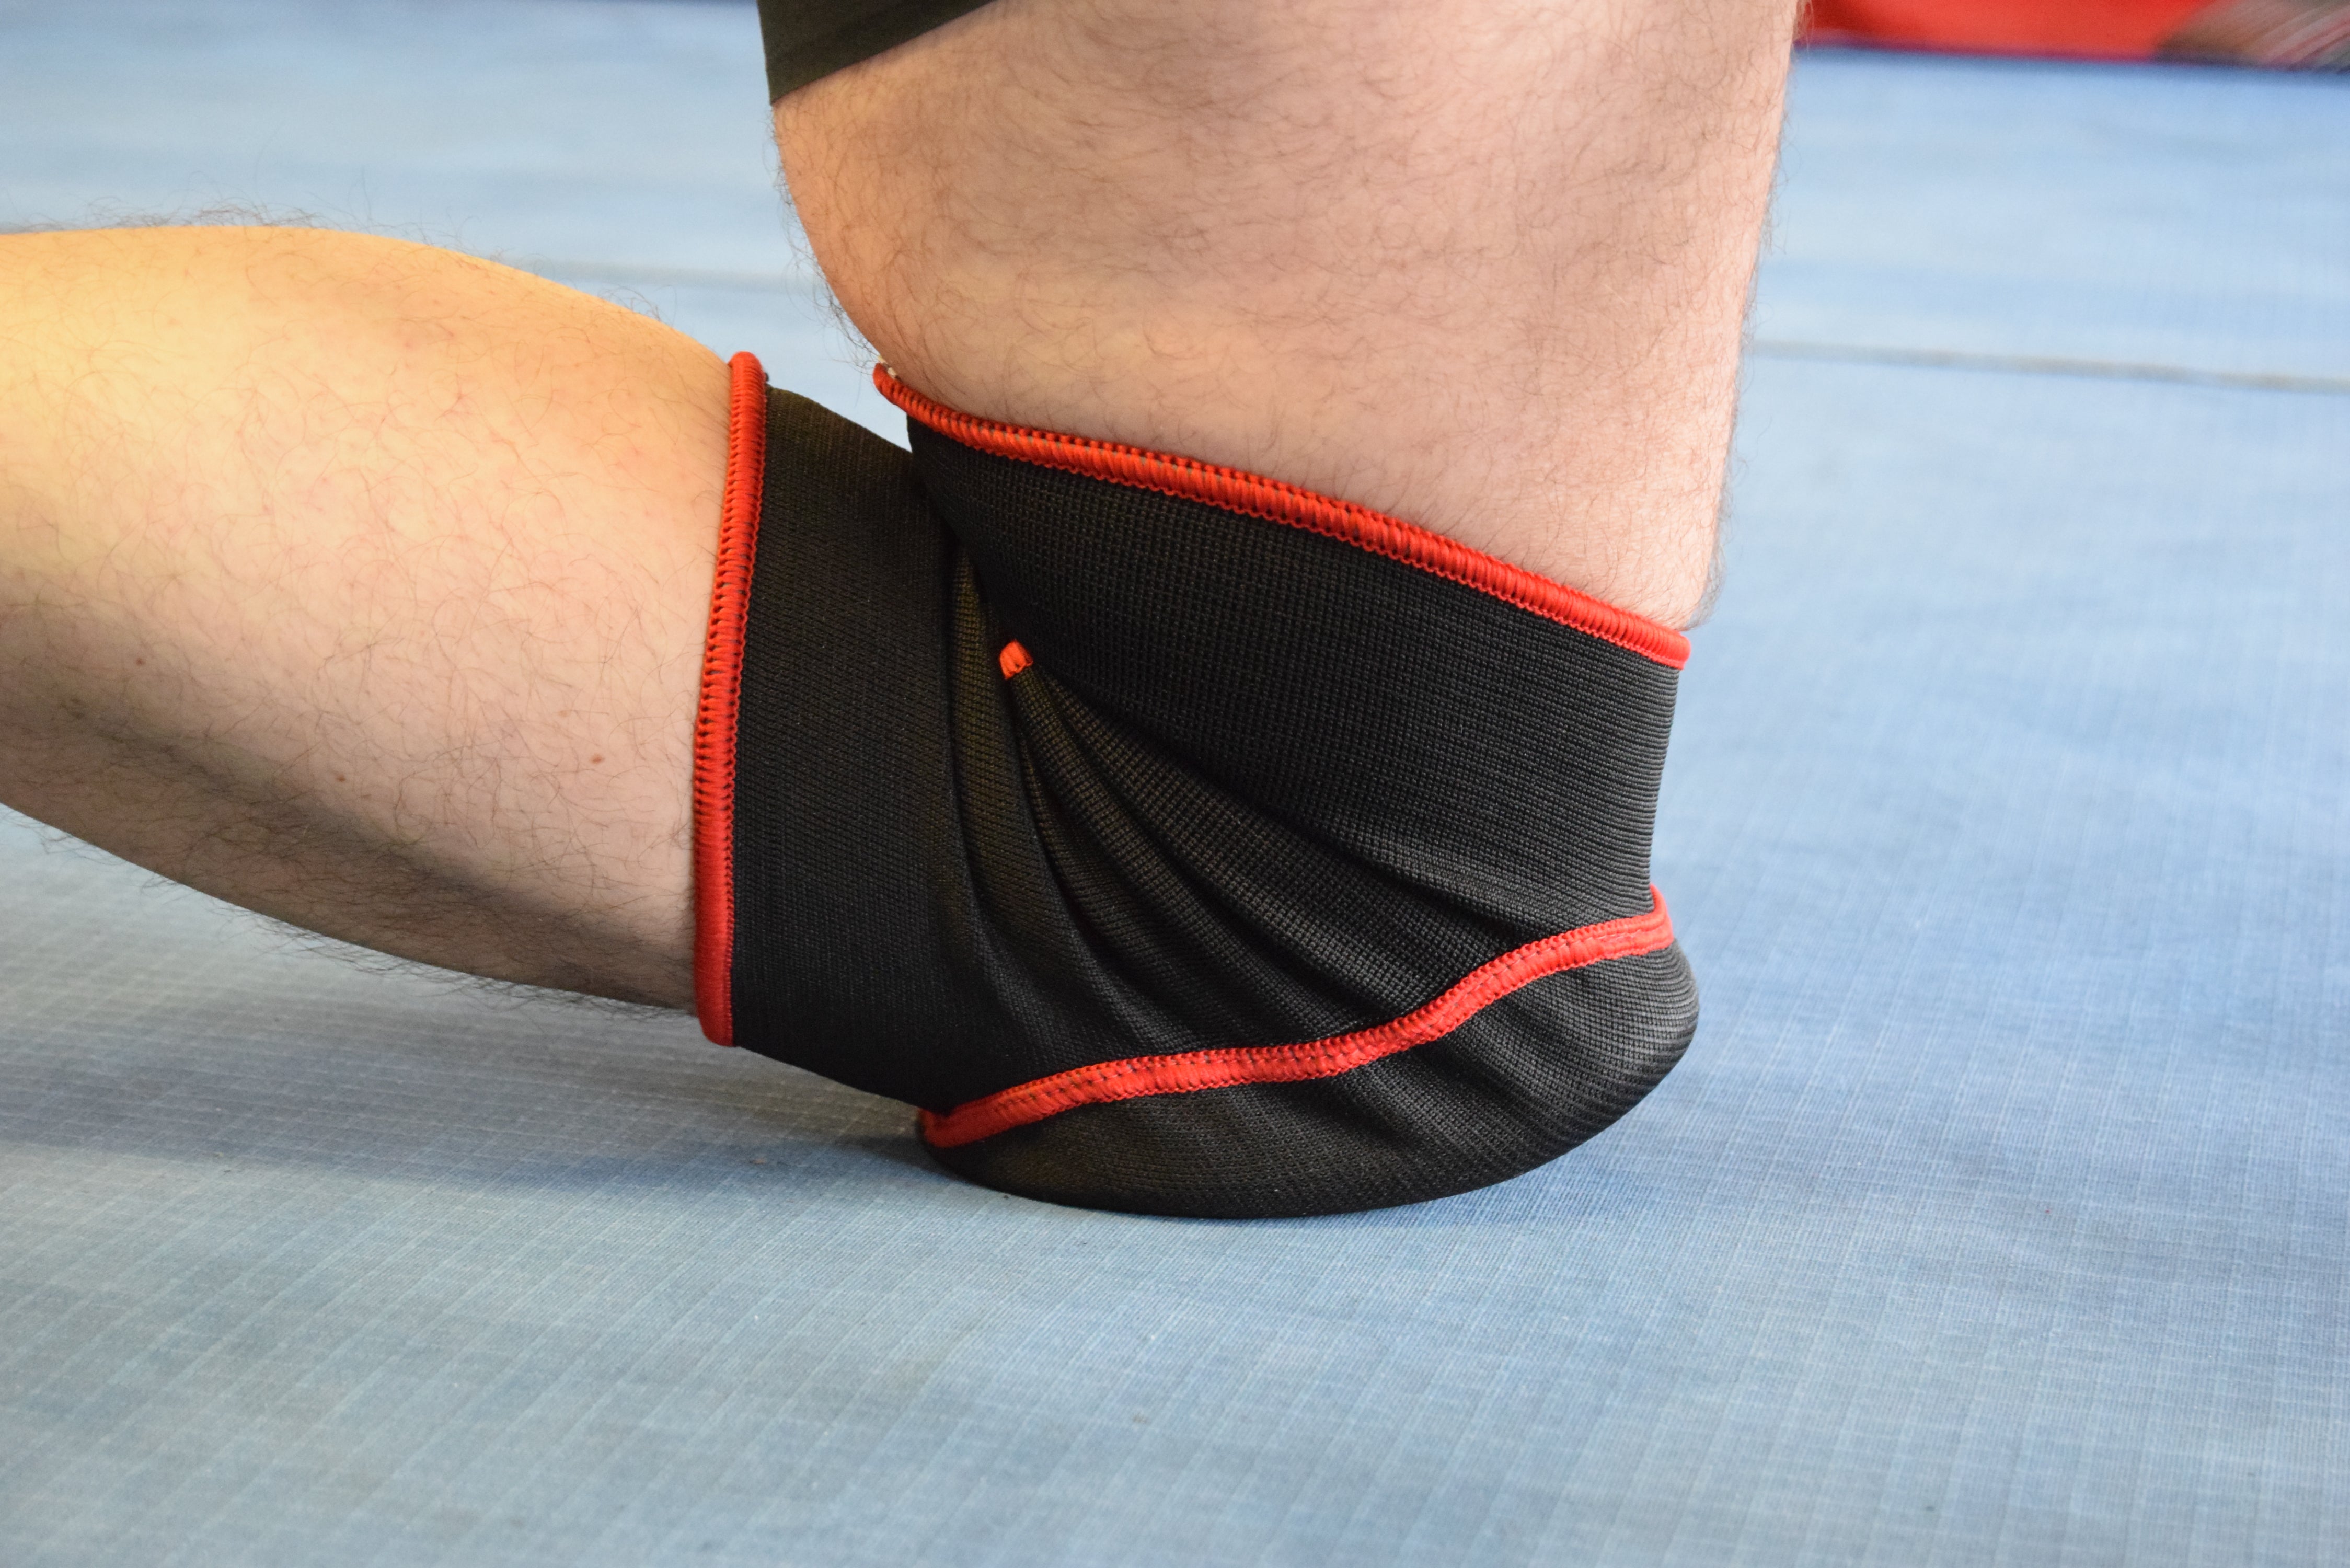 Elasticated Gel Padded Knee Support Sleeves for Heavy Duty Work. Repton Fitness Gear